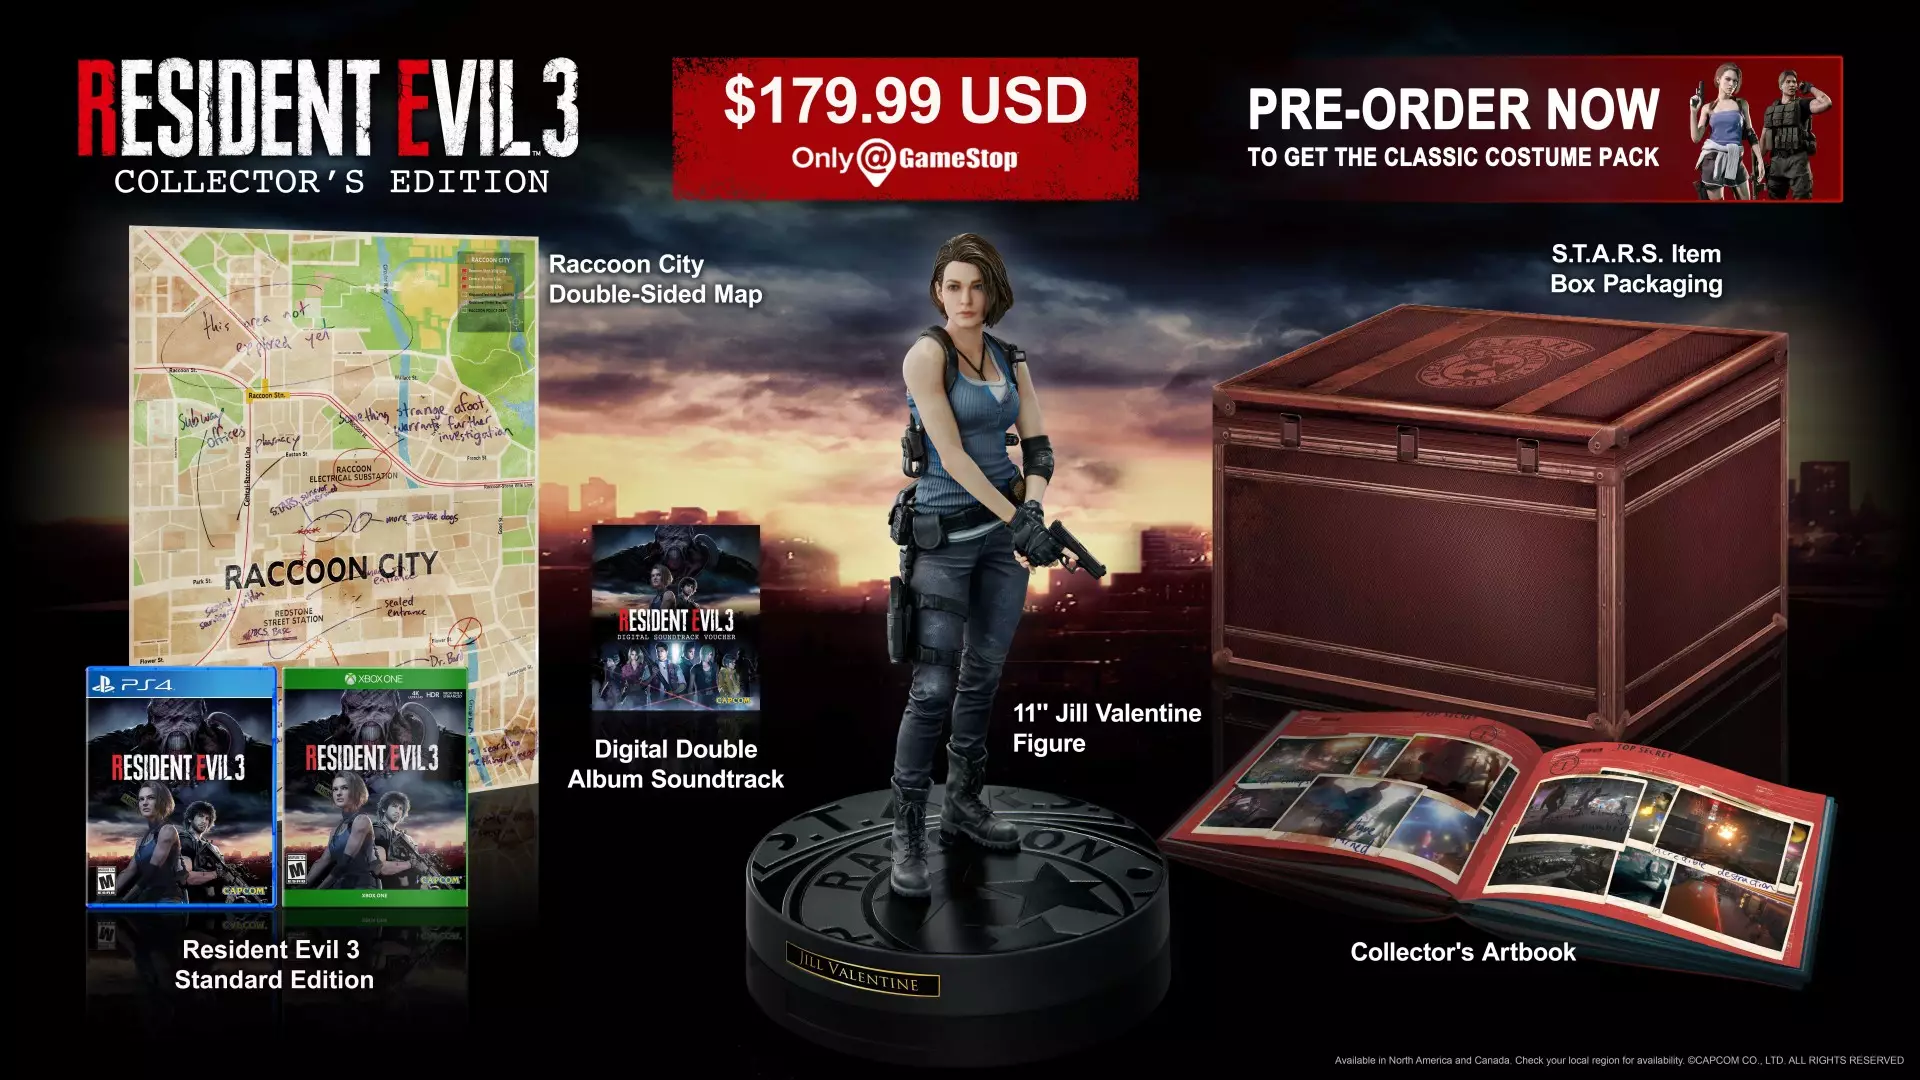 Resident Evil 3: Collector's Edition /